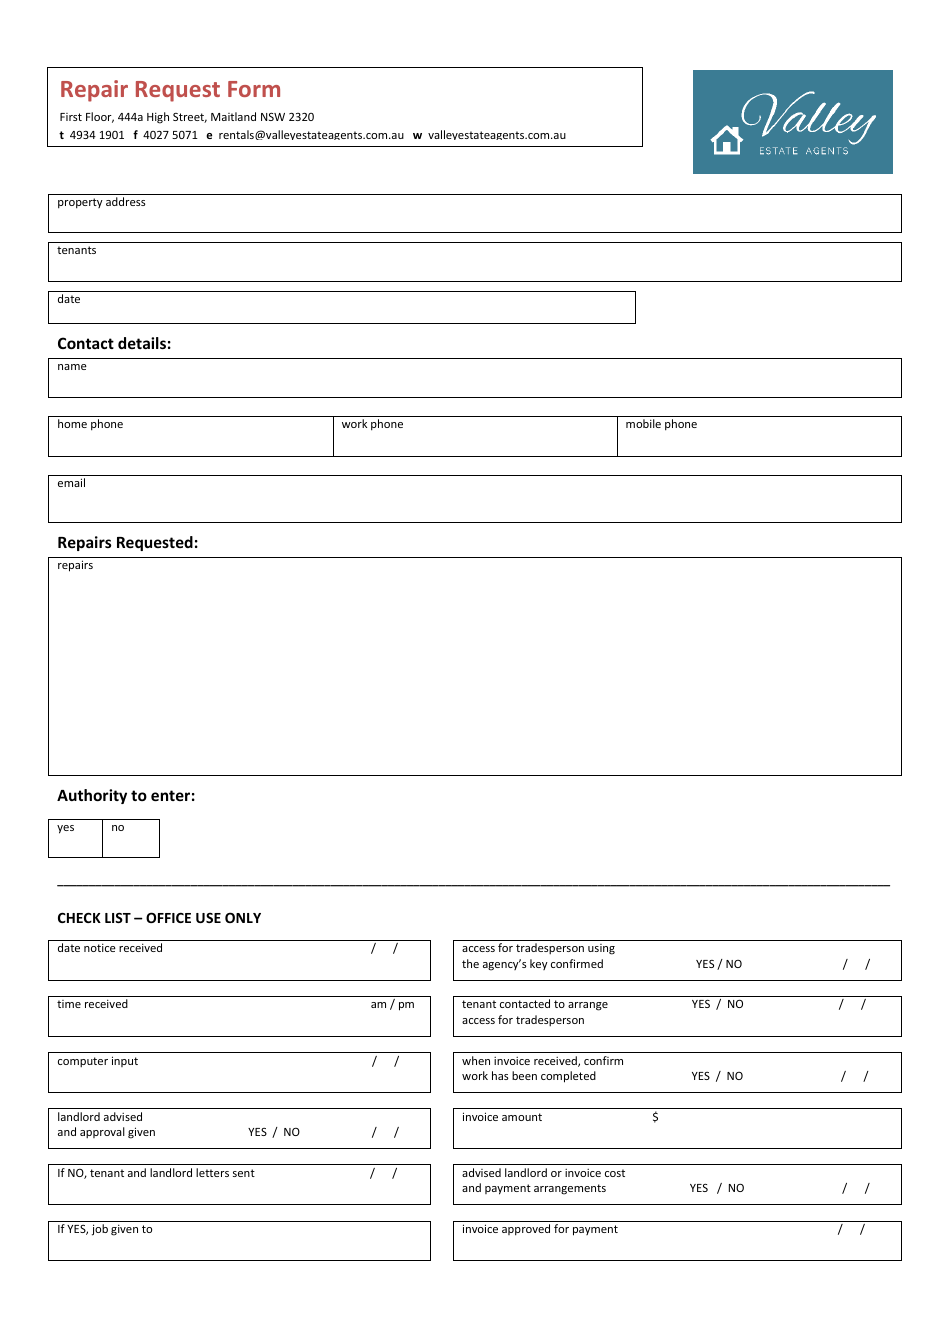 repair-request-form-valley-estate-agents-fill-out-sign-online-and